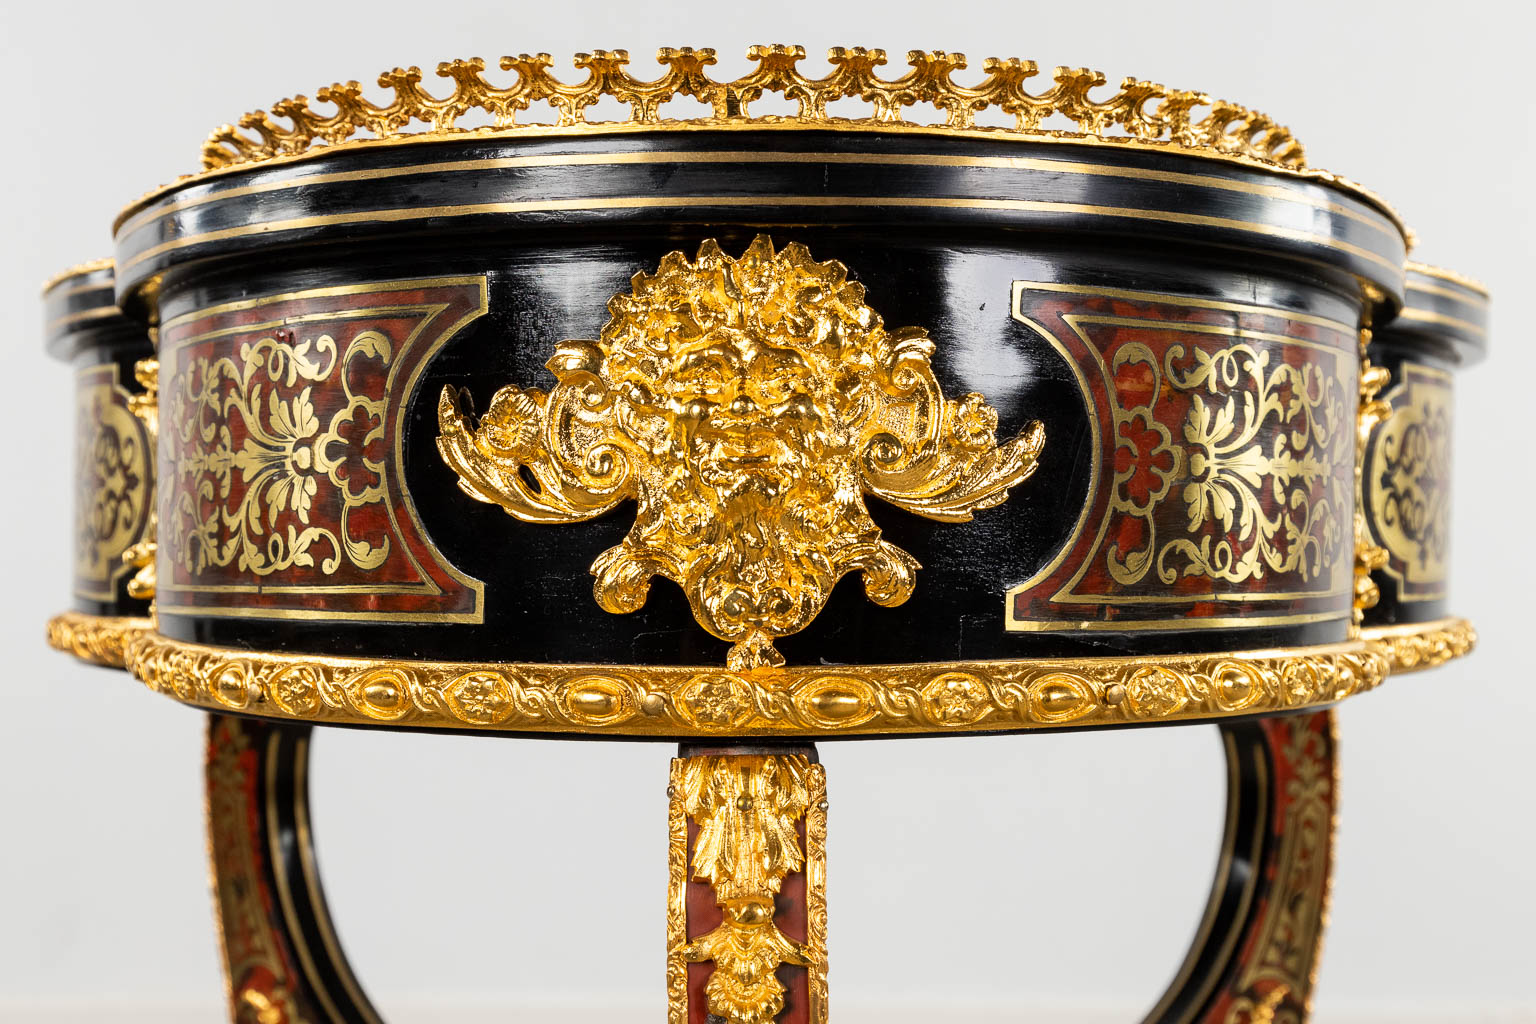 A planter, Boulle, tortoiseshell and copper inlay, Circa 1900. (D:49 x W:49 x H:84 cm)